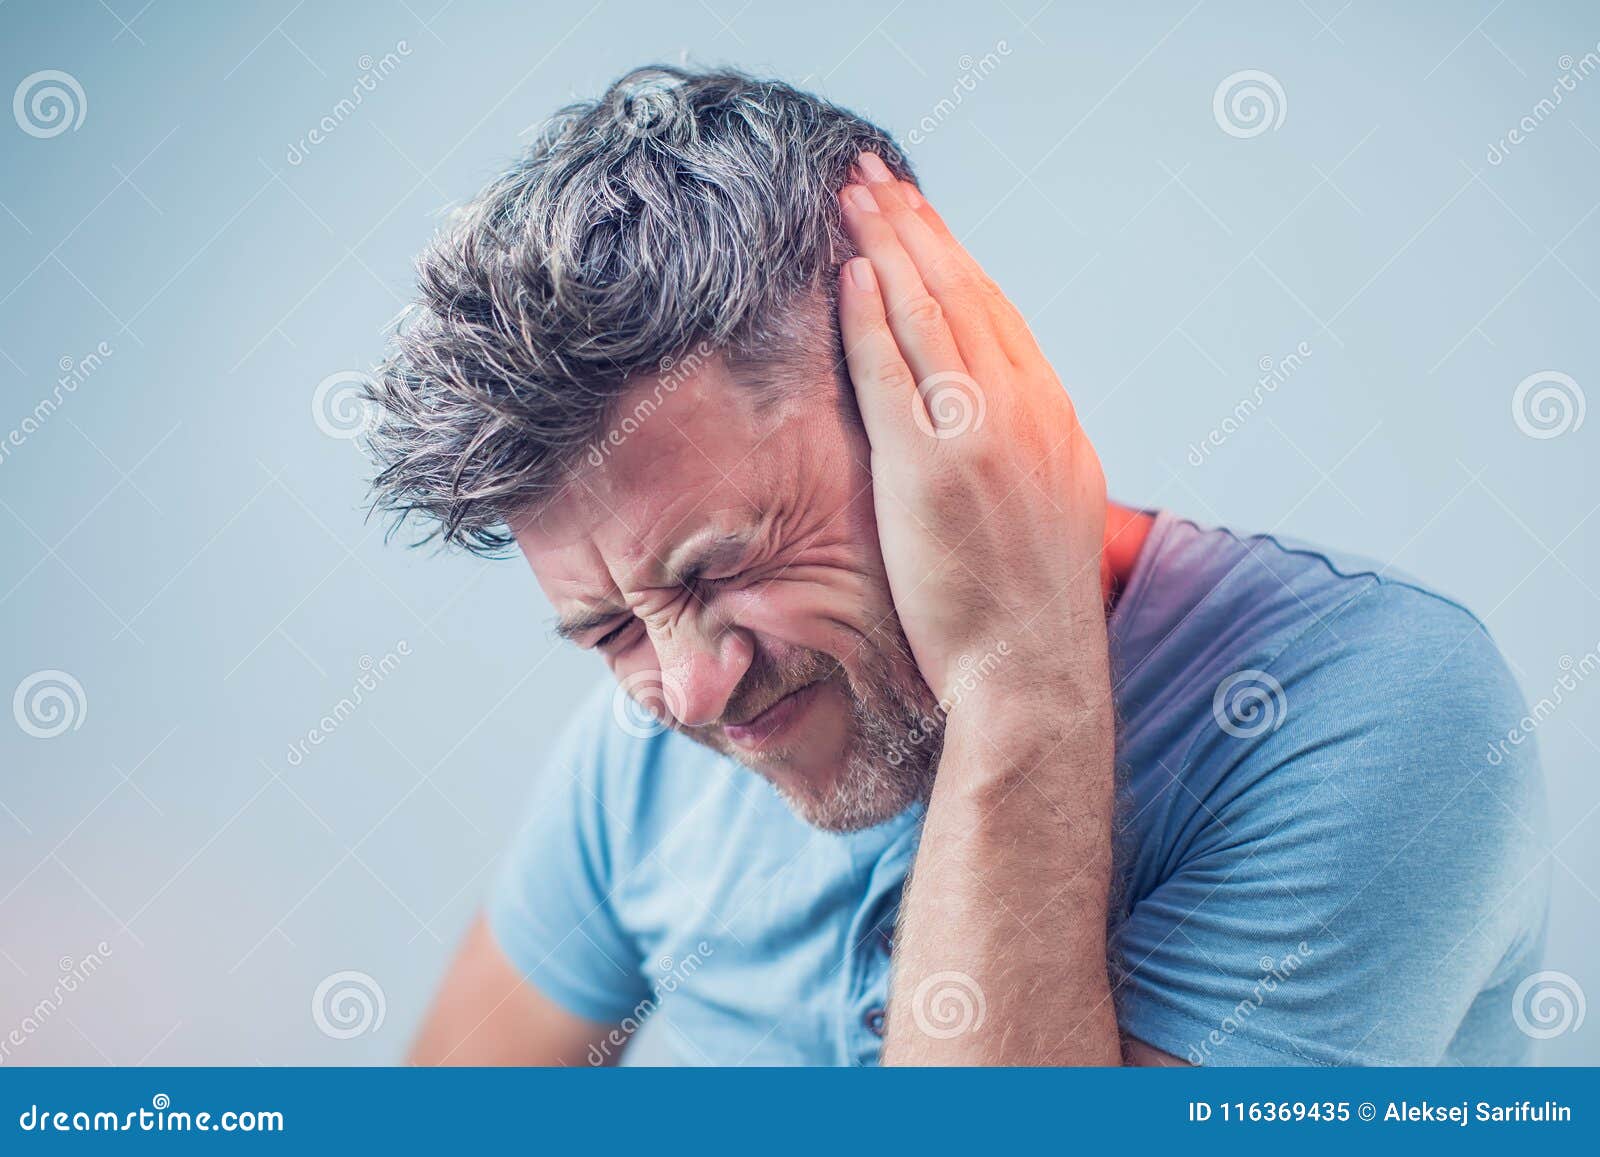 male having ear pain touching his painful head on gray